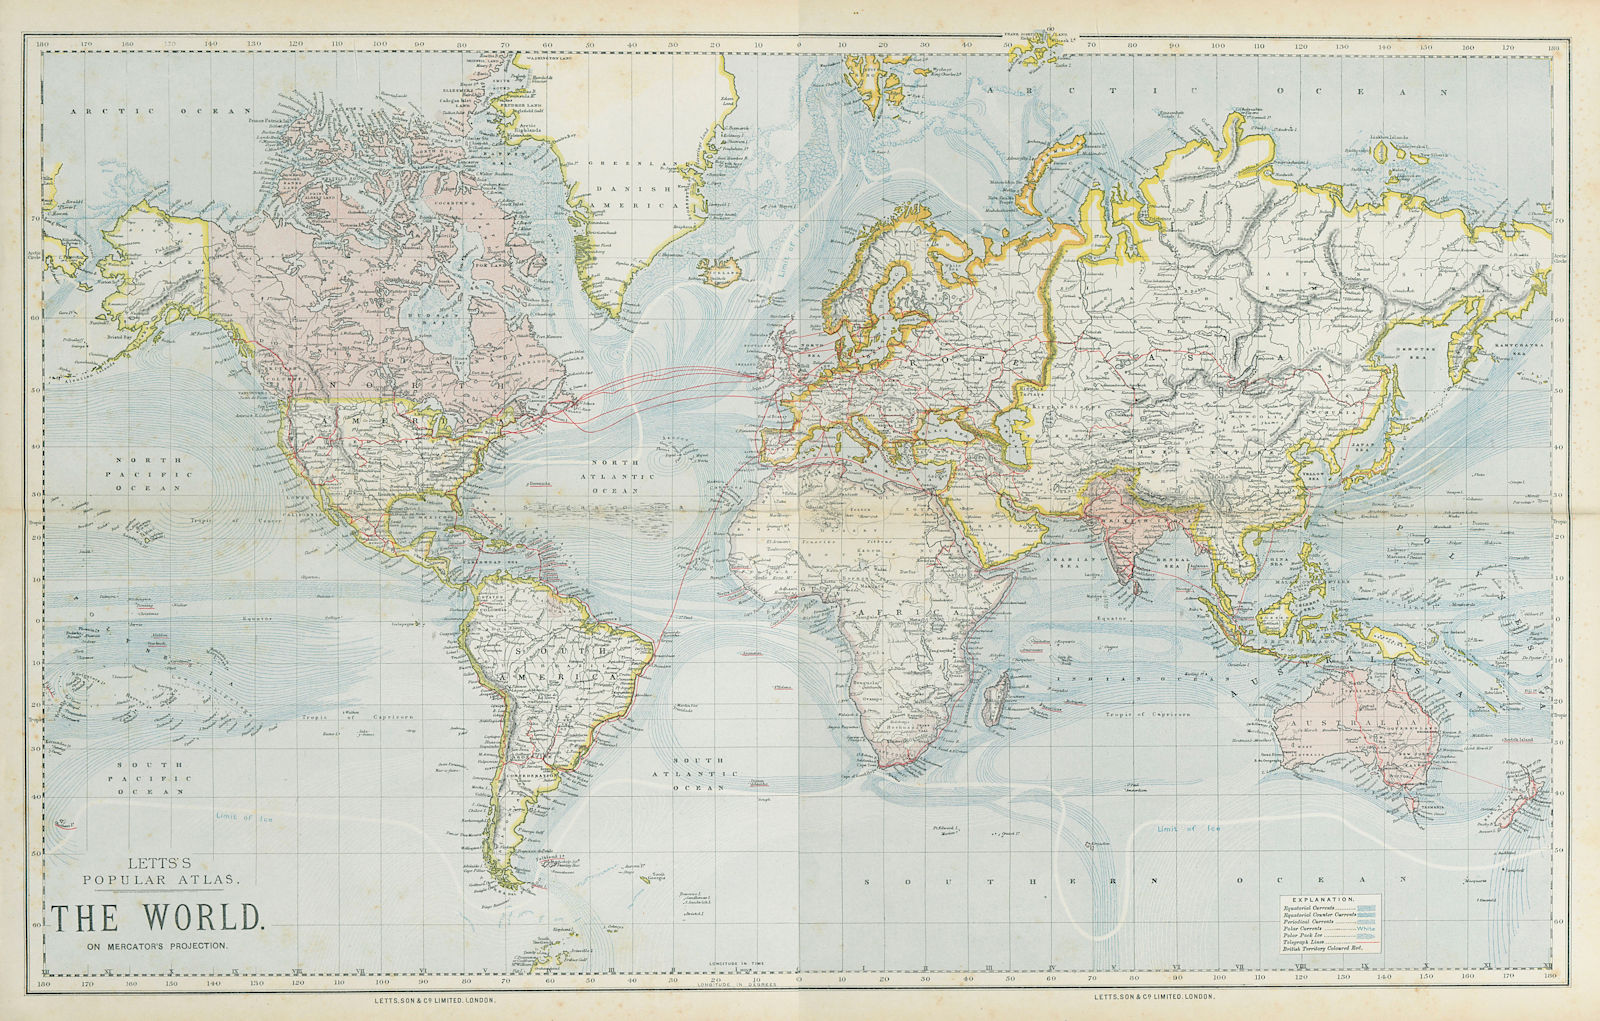 WORLD ON MERCATOR'S PROJECTION. British Empire. Telegraph cables. LETTS 1883 map